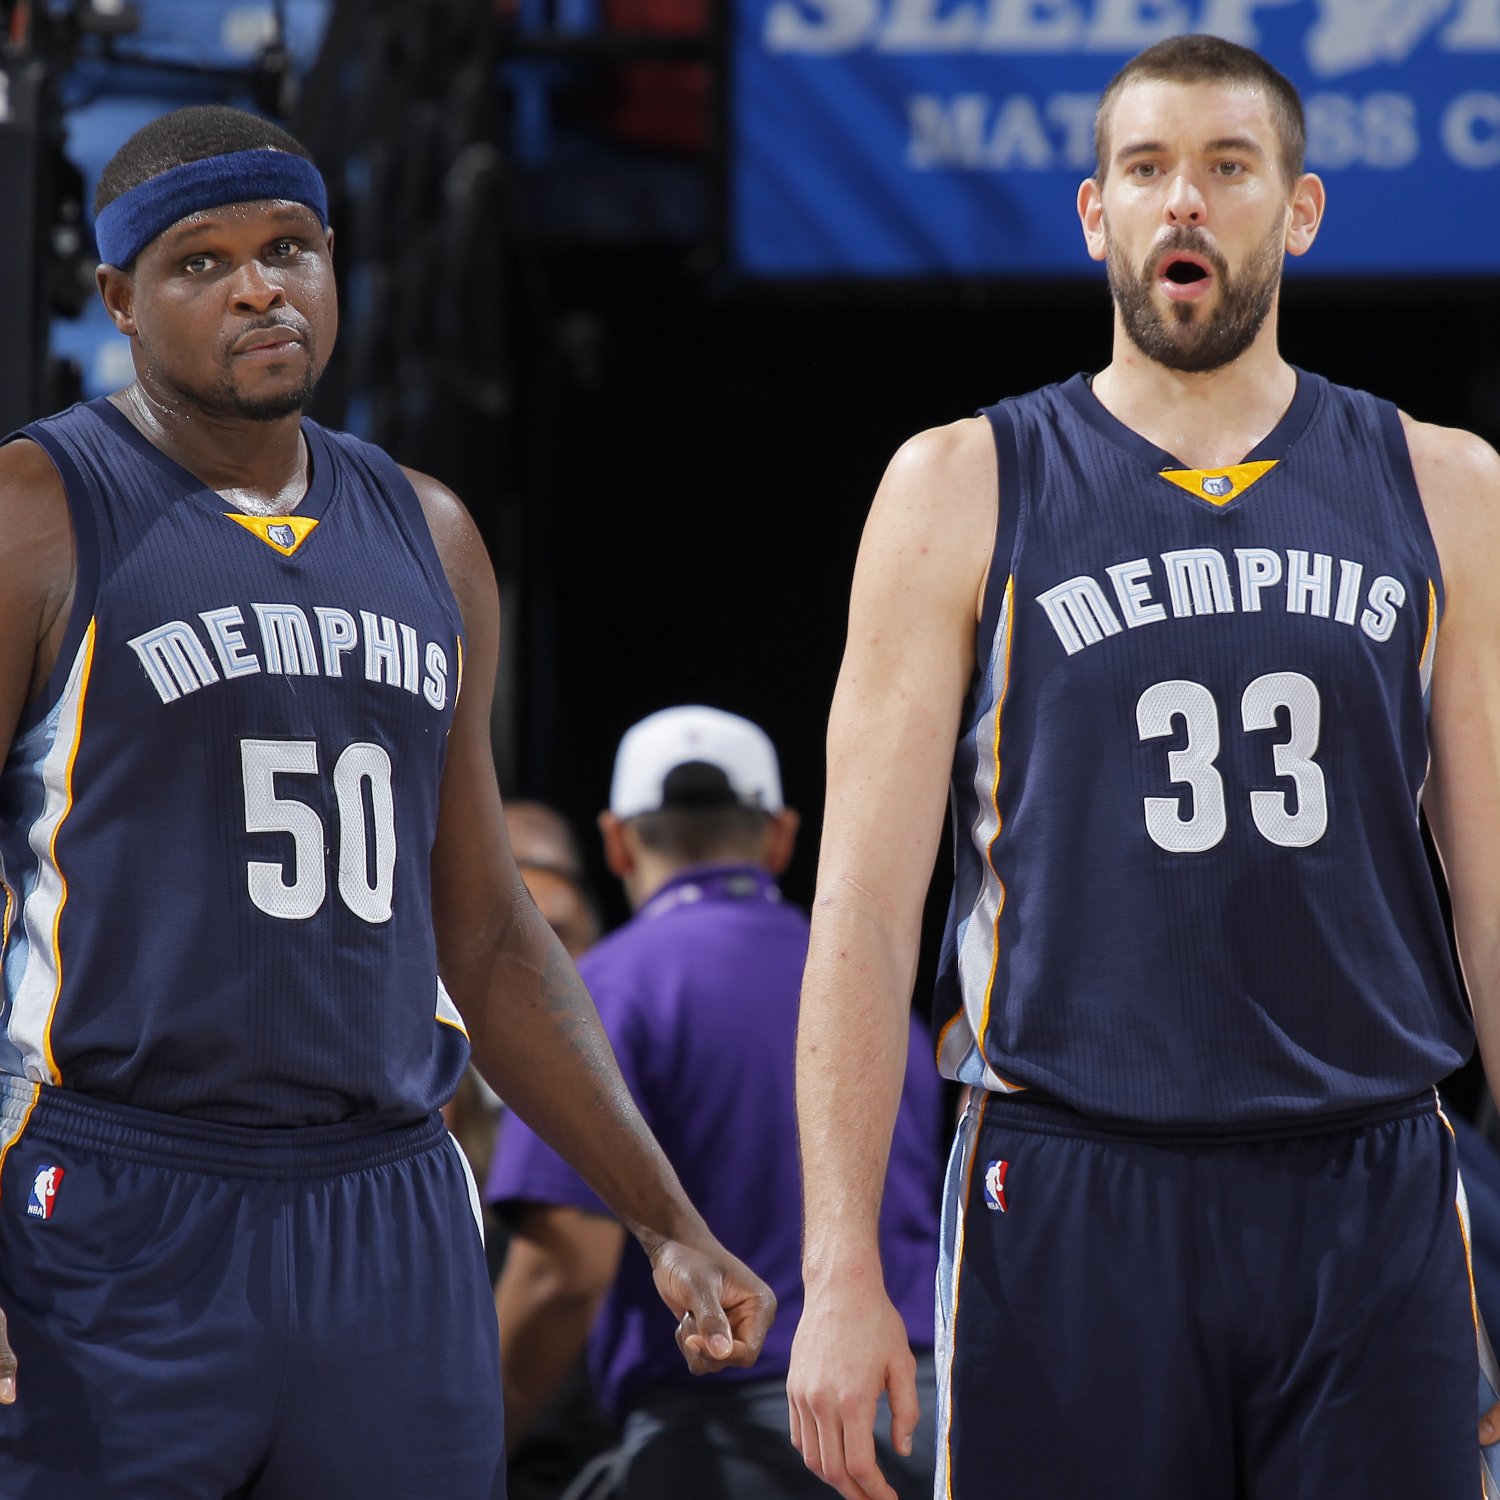 Chicago Bulls vs. Memphis Grizzlies Live Score, Highlights and